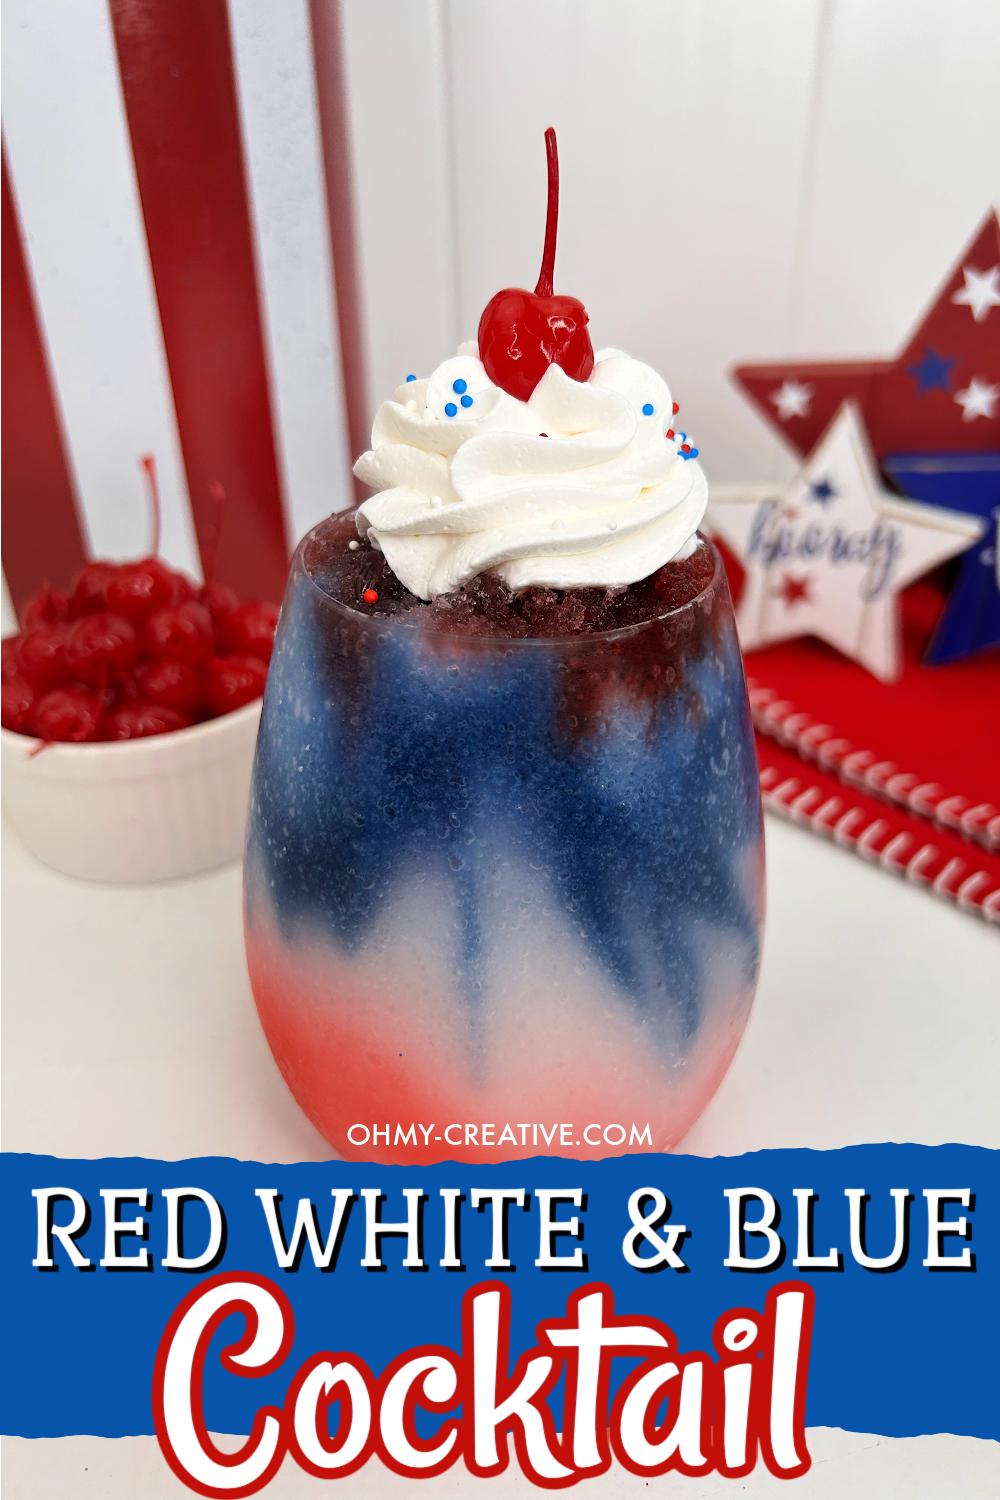 Featuring festive, patriotic colors, this Red White, And Blue Cocktail is like frozen slushy with red on the bottom and blue on the top layer with whipped cream and a cherry on top. Added are patriotic sprinkles. A bowl of extra cherries are off to the side and wooden star decorations in the background.